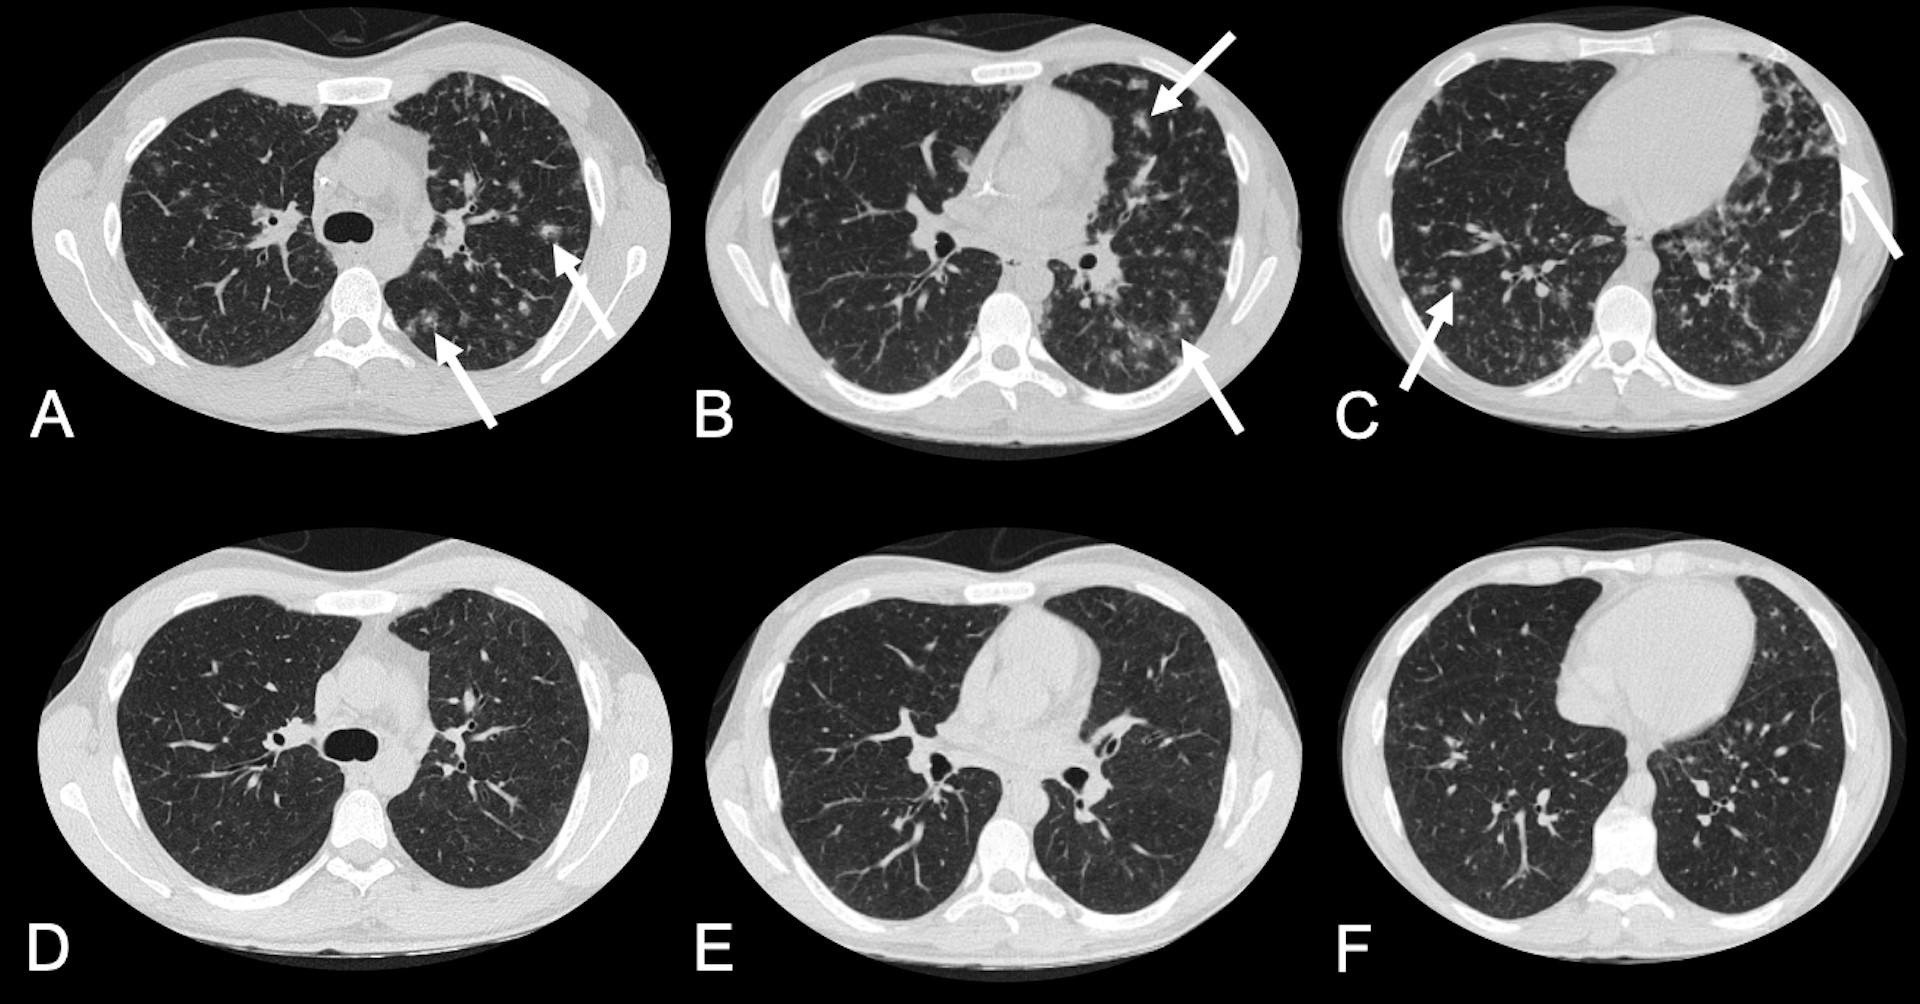 Multiple lung nodules with the halo sign due to syphilis